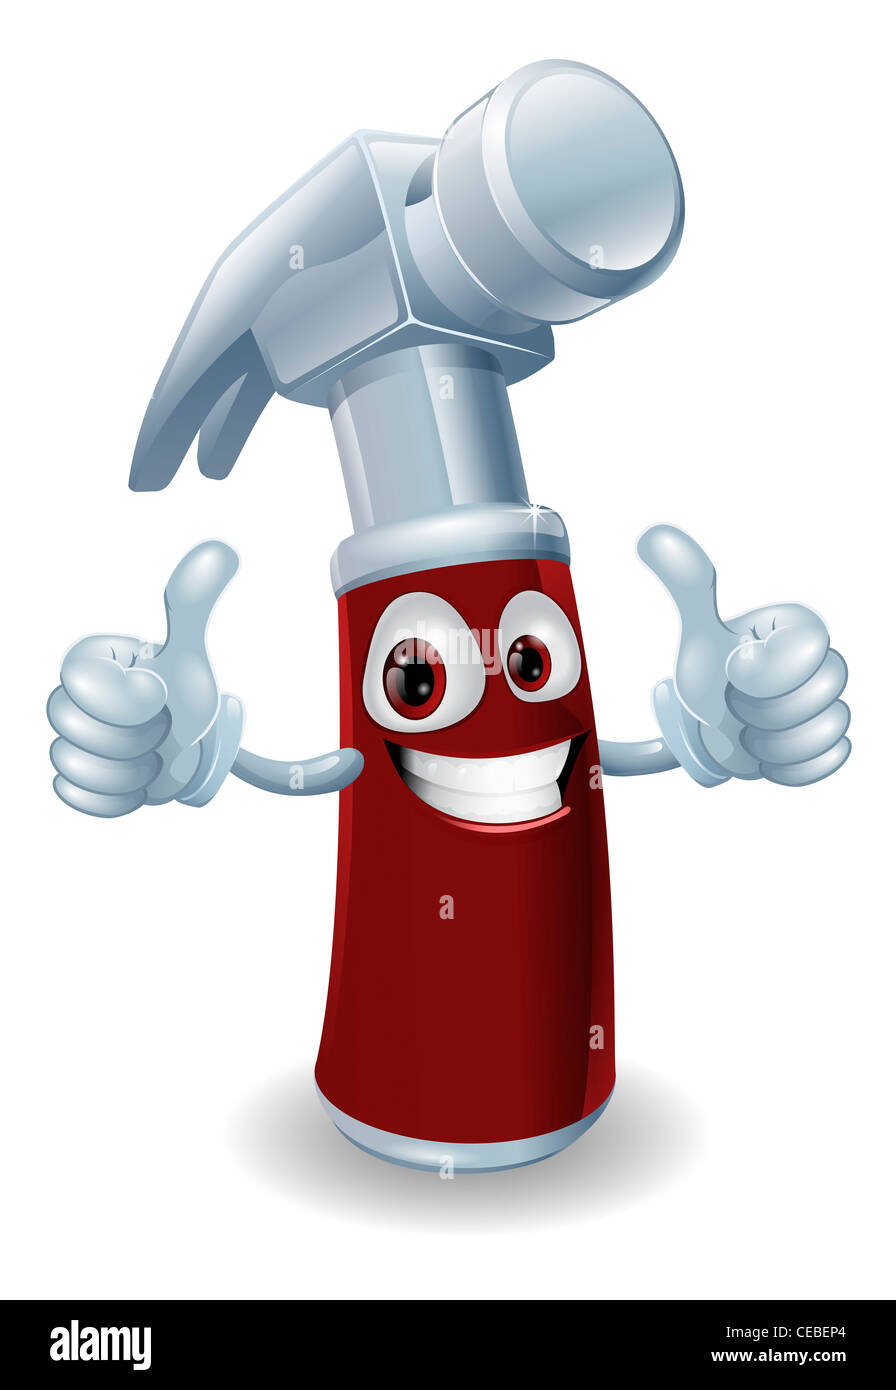 Hammer cartoon character mascot giving a double thumbs up Stock Photo